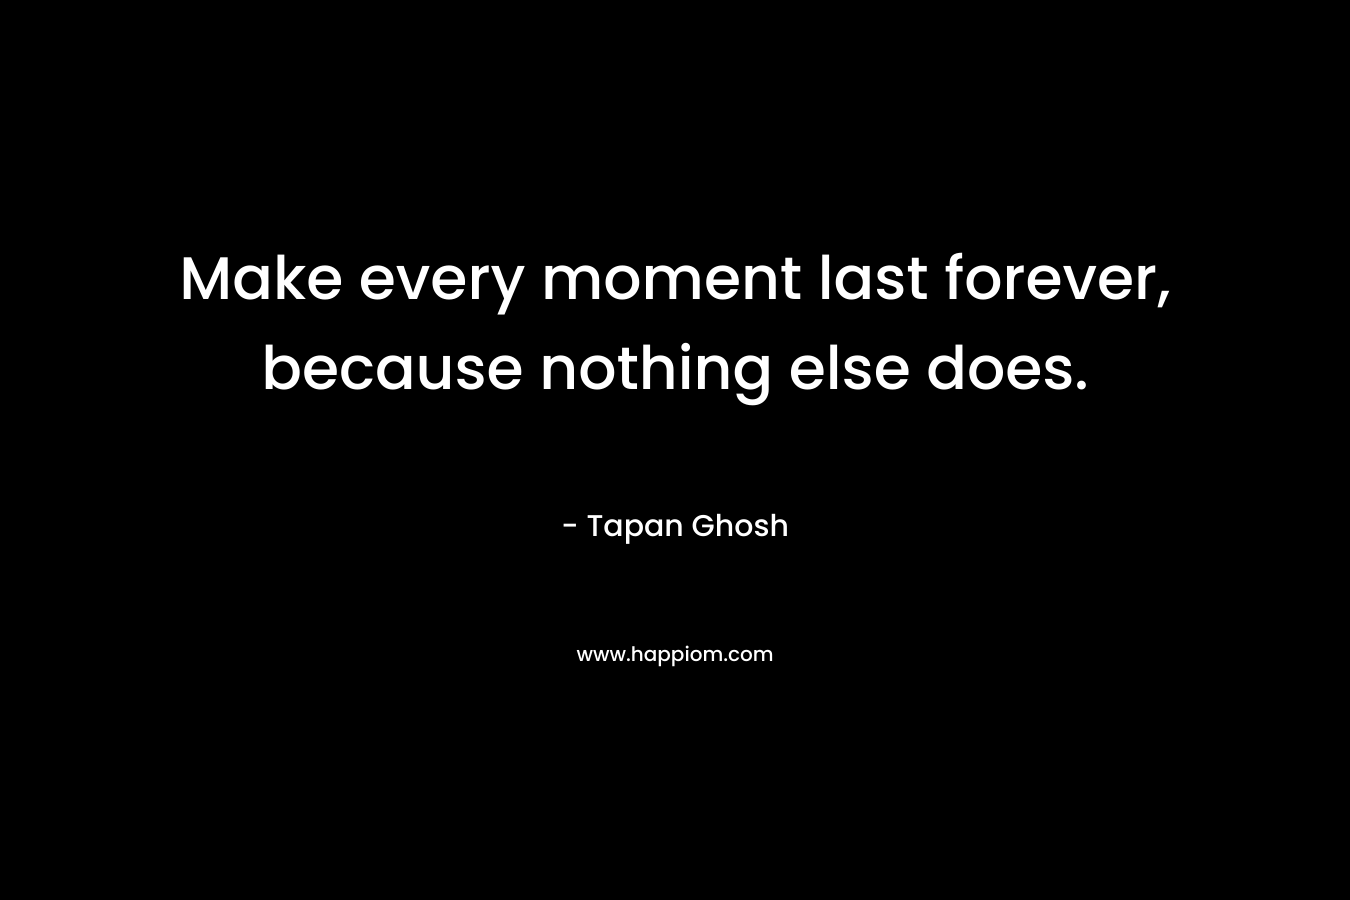 Make every moment last forever, because nothing else does.